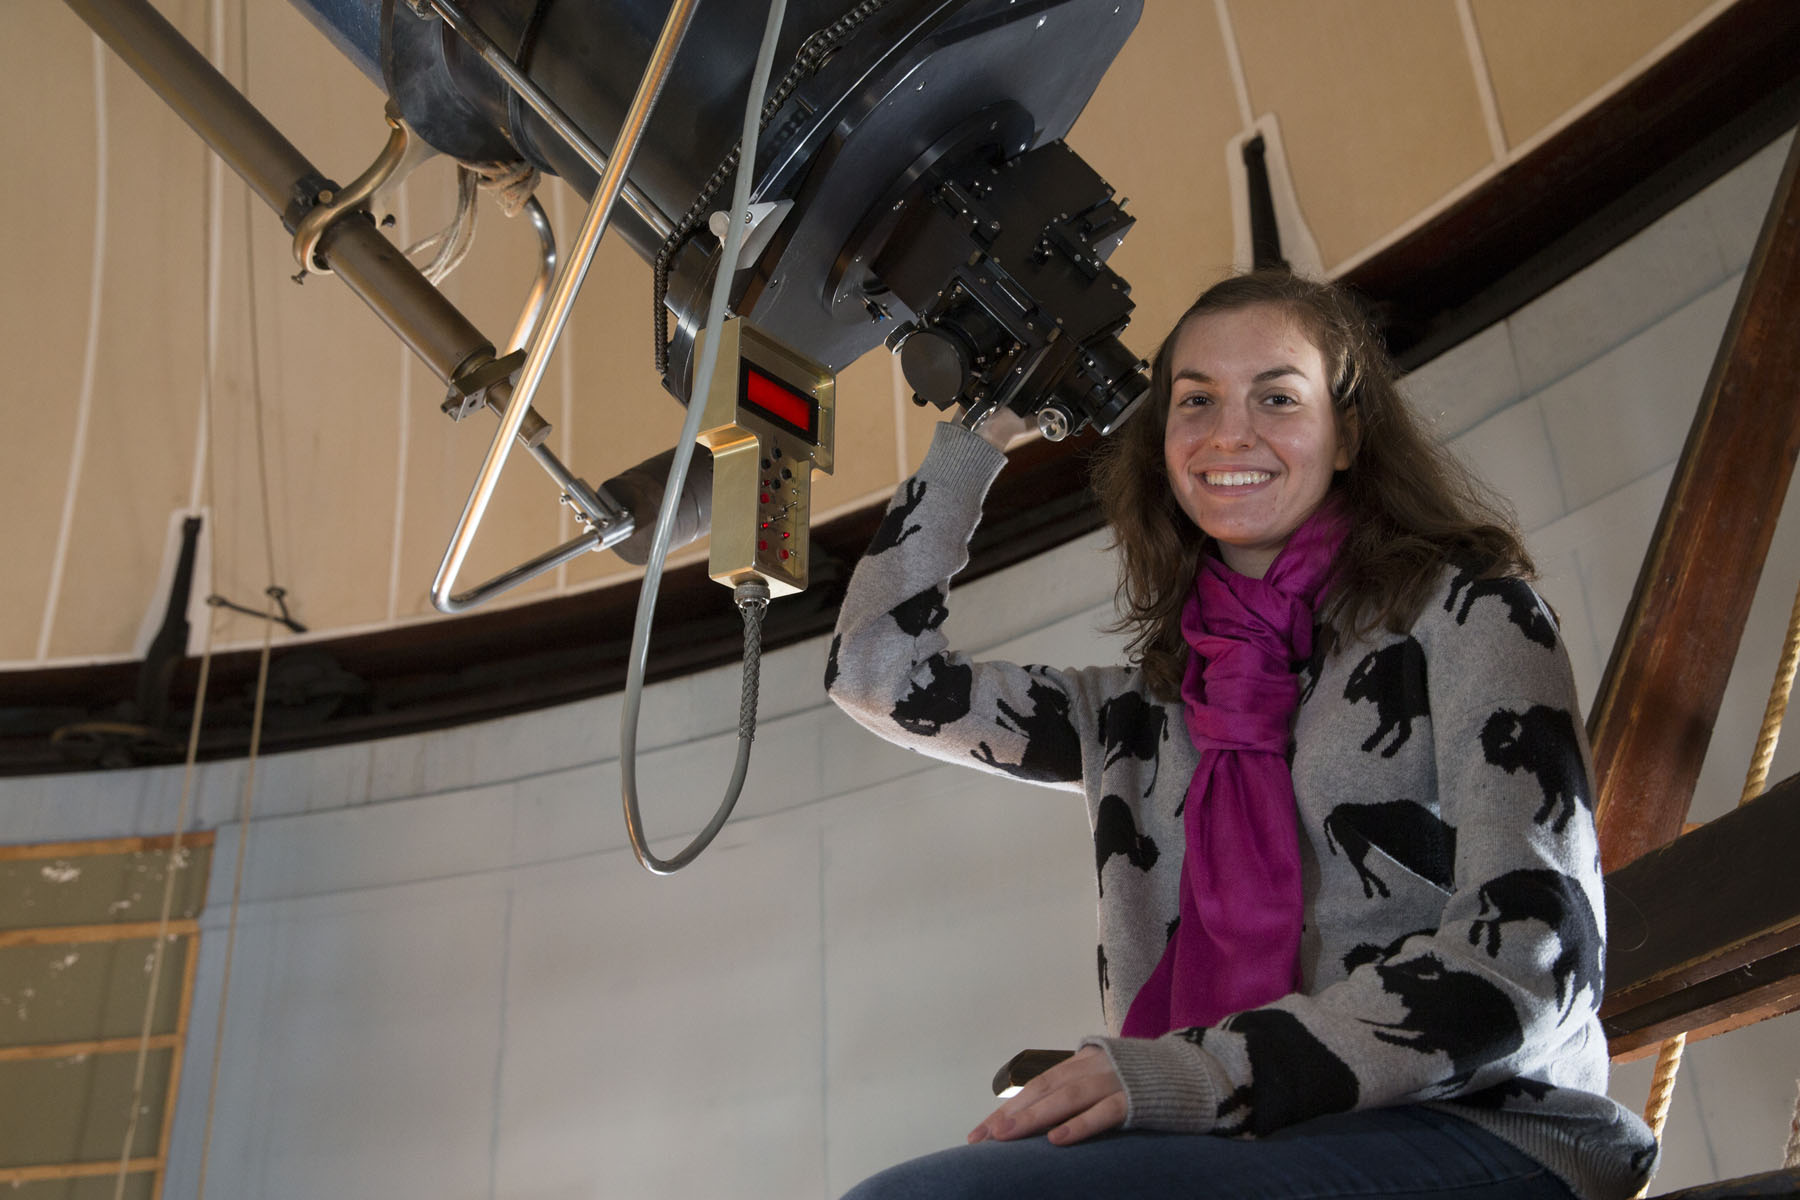 Catherine Zucker sits at the base of a large telescope smiling at the camera